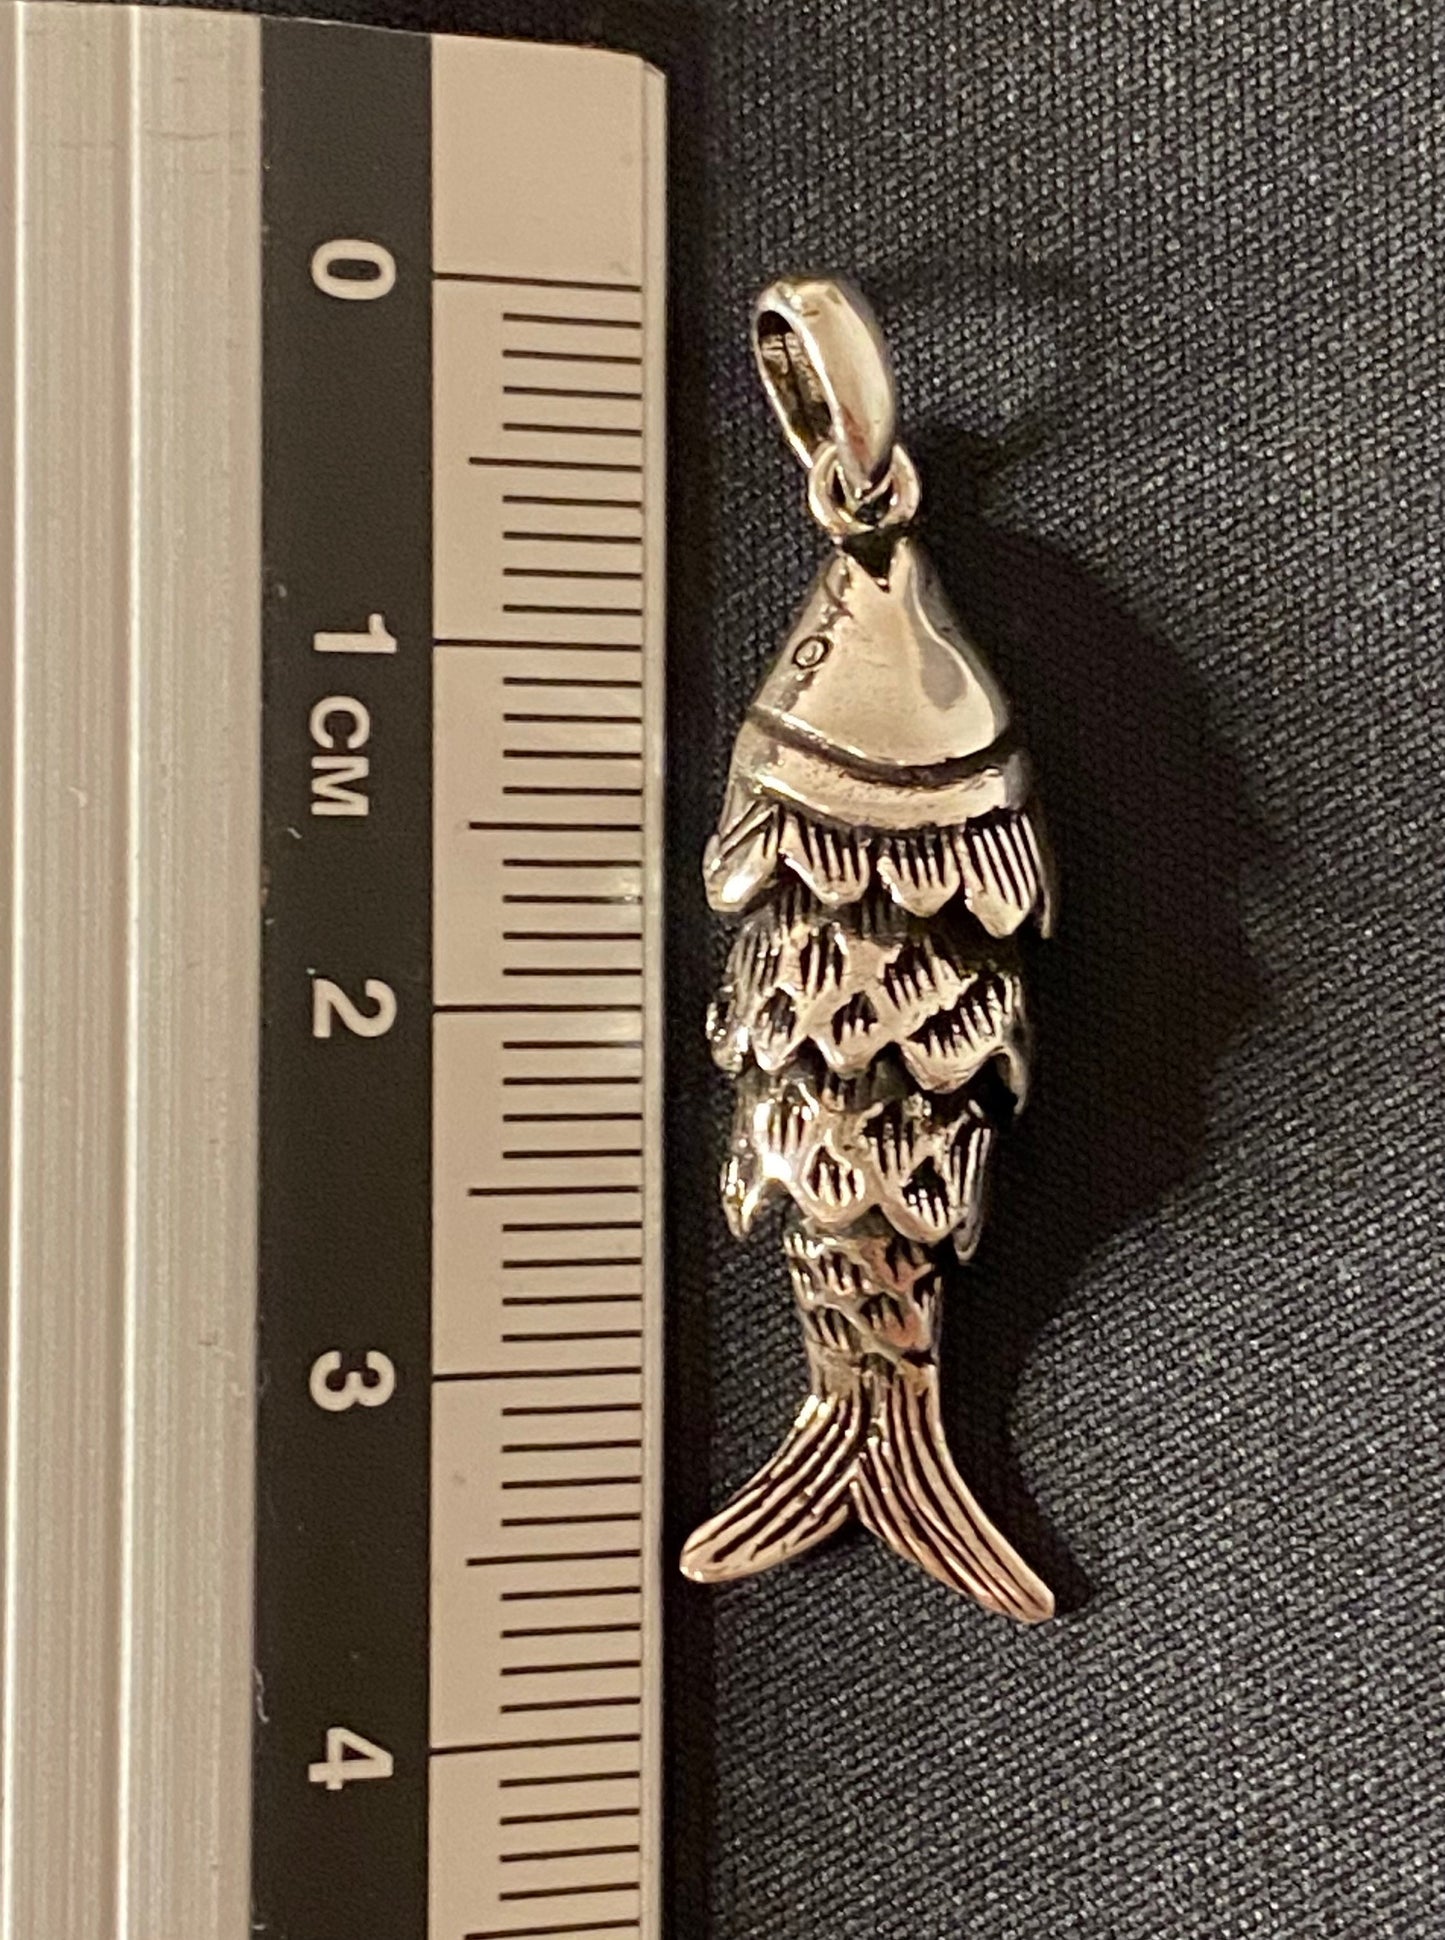 Articulated moving fish pendant Sterling Silver 925 - TSE094